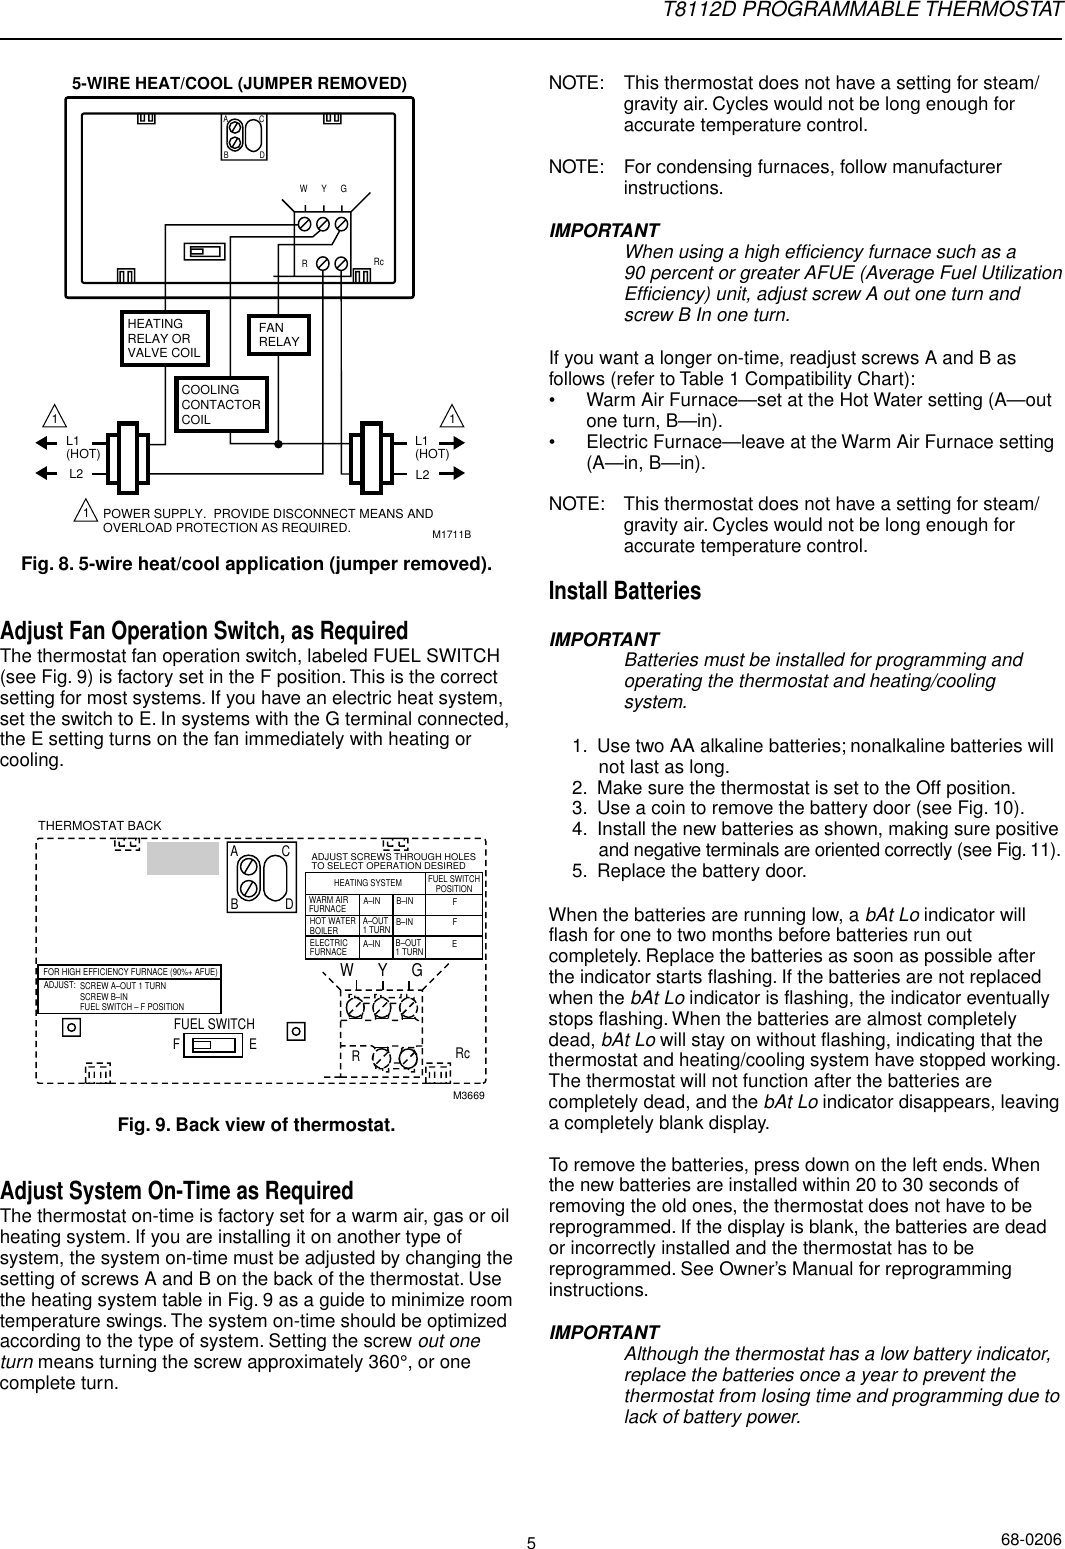 Page 5 of 8 - Honeywell Honeywell-T8112D-Owners-Manual- 68-0170 - T8112 Programmable Thermostat  Honeywell-t8112d-owners-manual